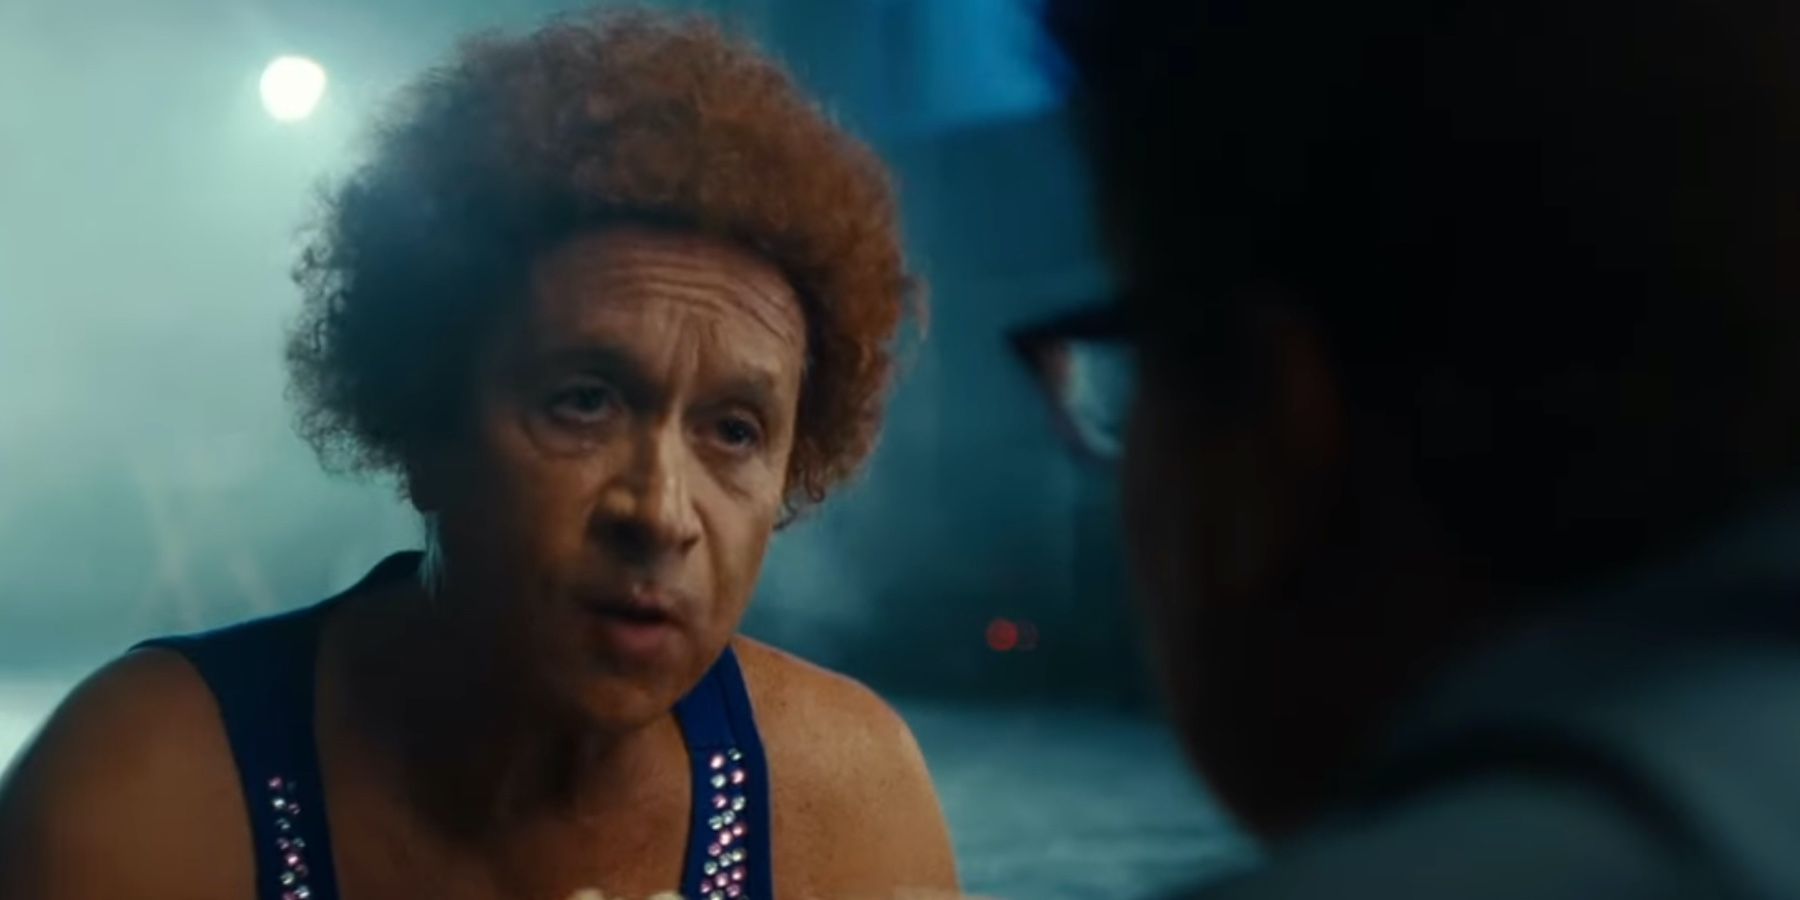 Brad Pitts Not Gonna Play You: Pauly Shore Replies After Richard Simmons Disapproves Of His BiopicBrad Pitts Not Gonna Play You: Pauly Shore Replies After Richard Simmons Disapproves Of His BiopicBrad Pitts Not Gonna Play You: Pauly Shore Replies After Richard Simmons Disapproves Of His Biopic